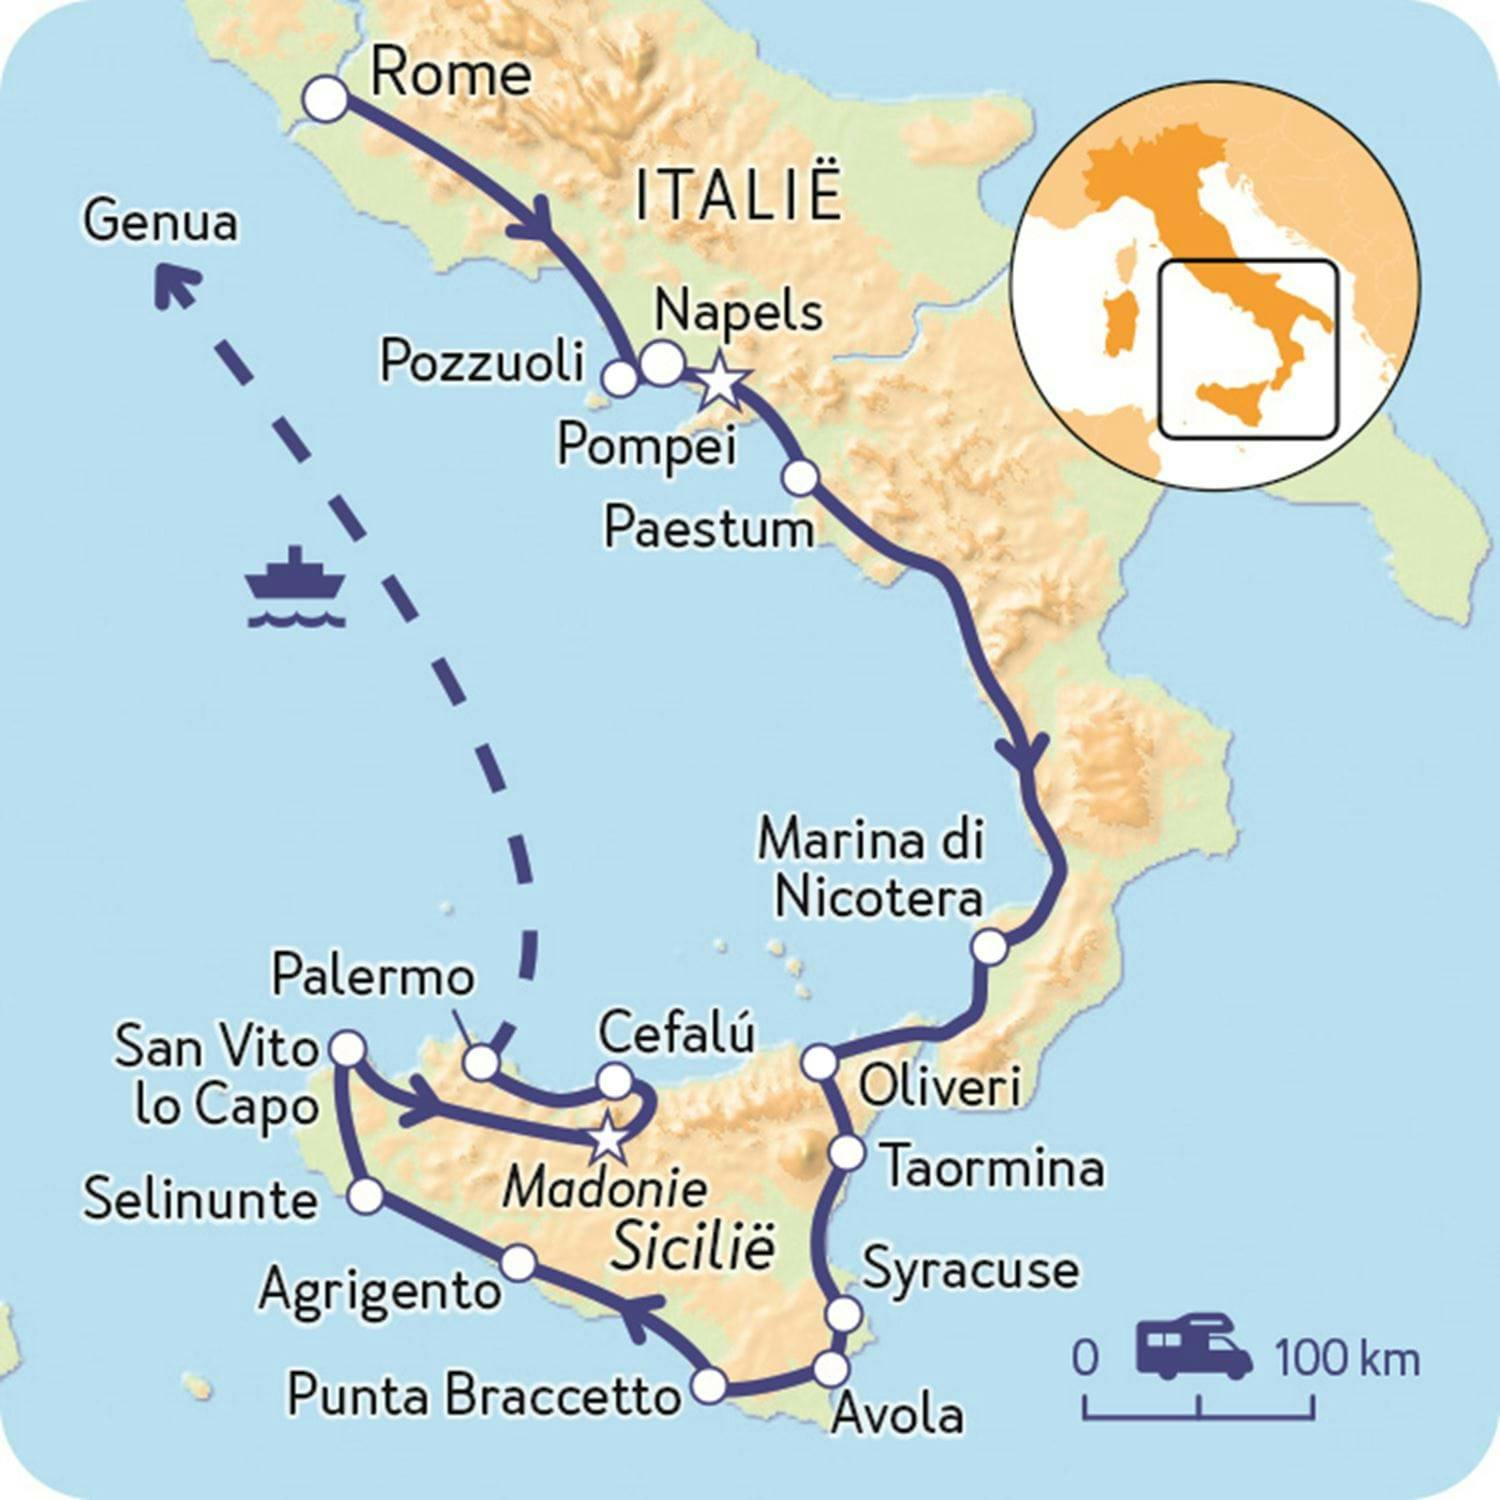 Route Italy - from Rome to Sicily